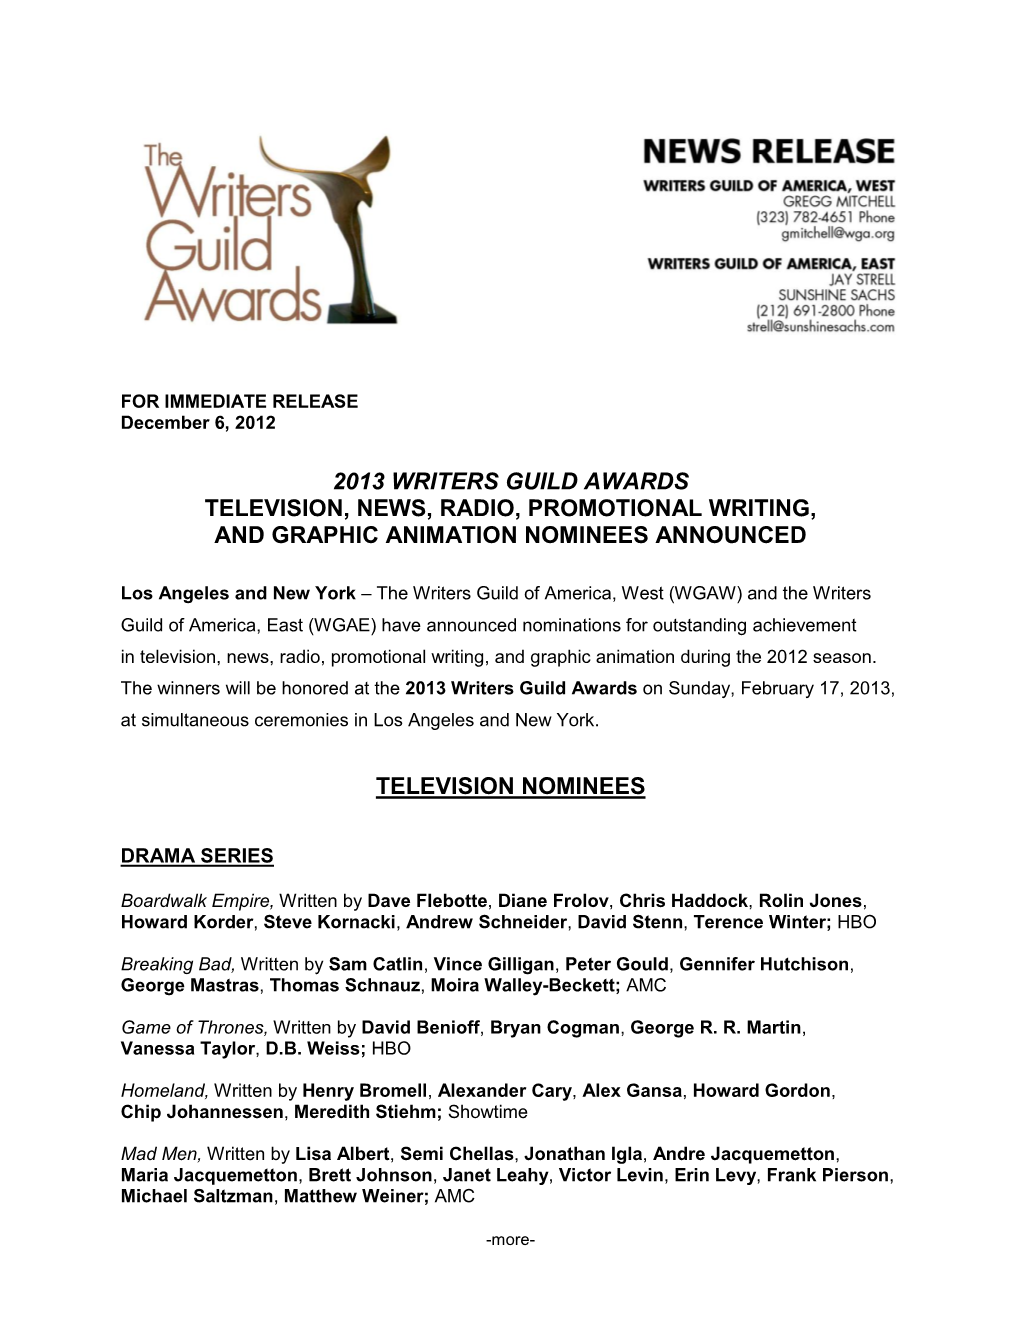 2013 Writers Guild Awards Television, News, Radio, Promotional Writing, and Graphic Animation Nominees Announced